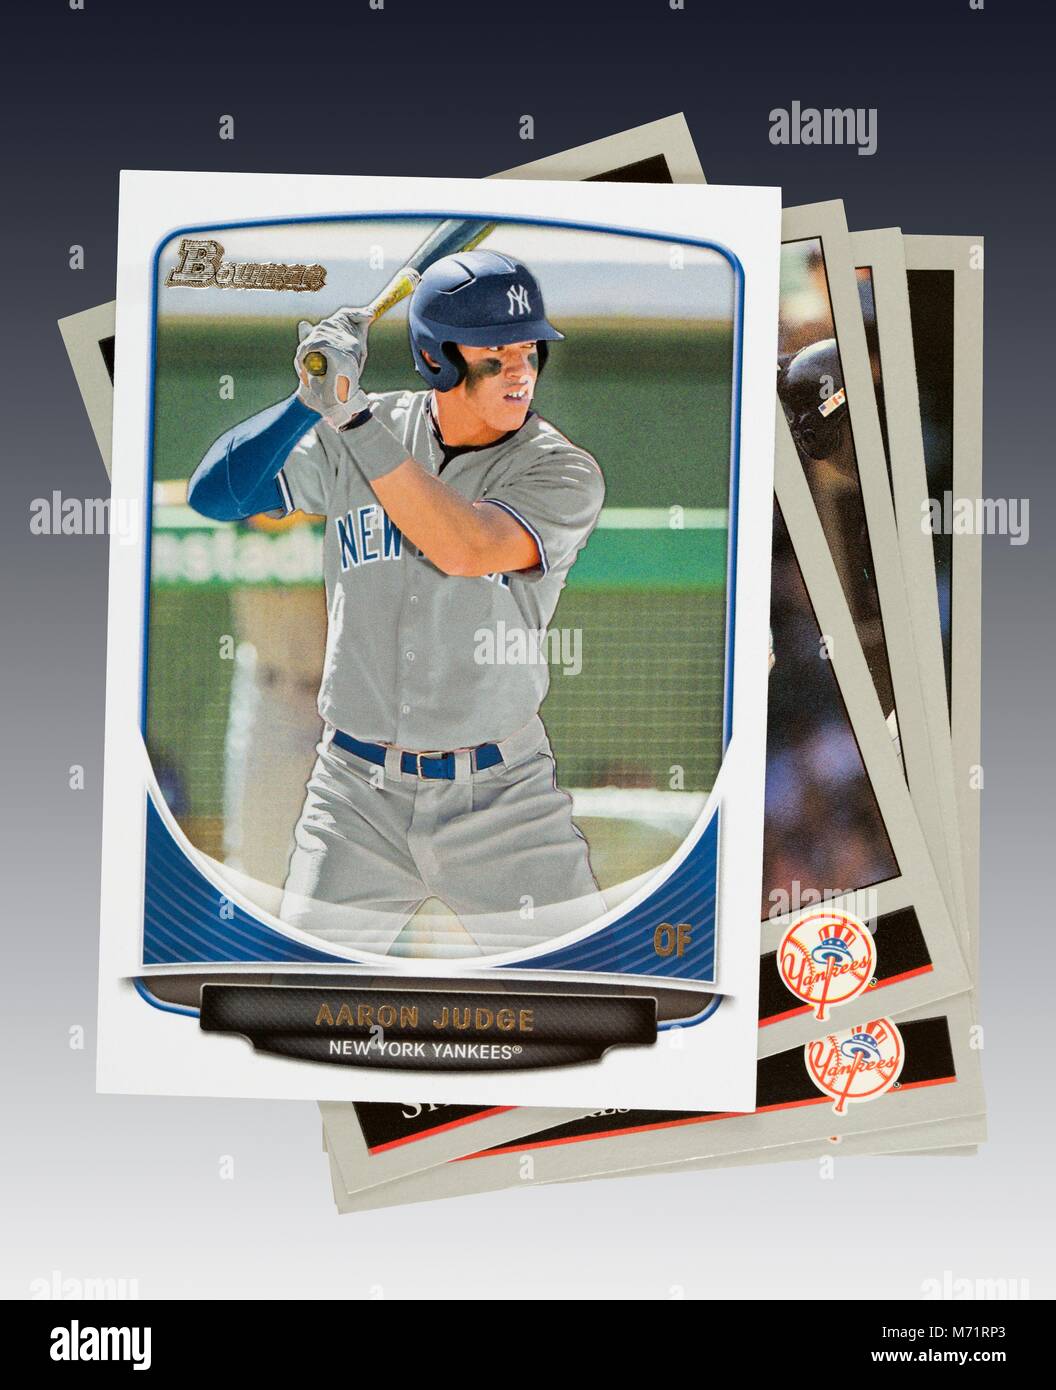 Aaron Judge of the New York Yankees 2013 Bowman rookie card on top of stack of baseball cards Stock Photo